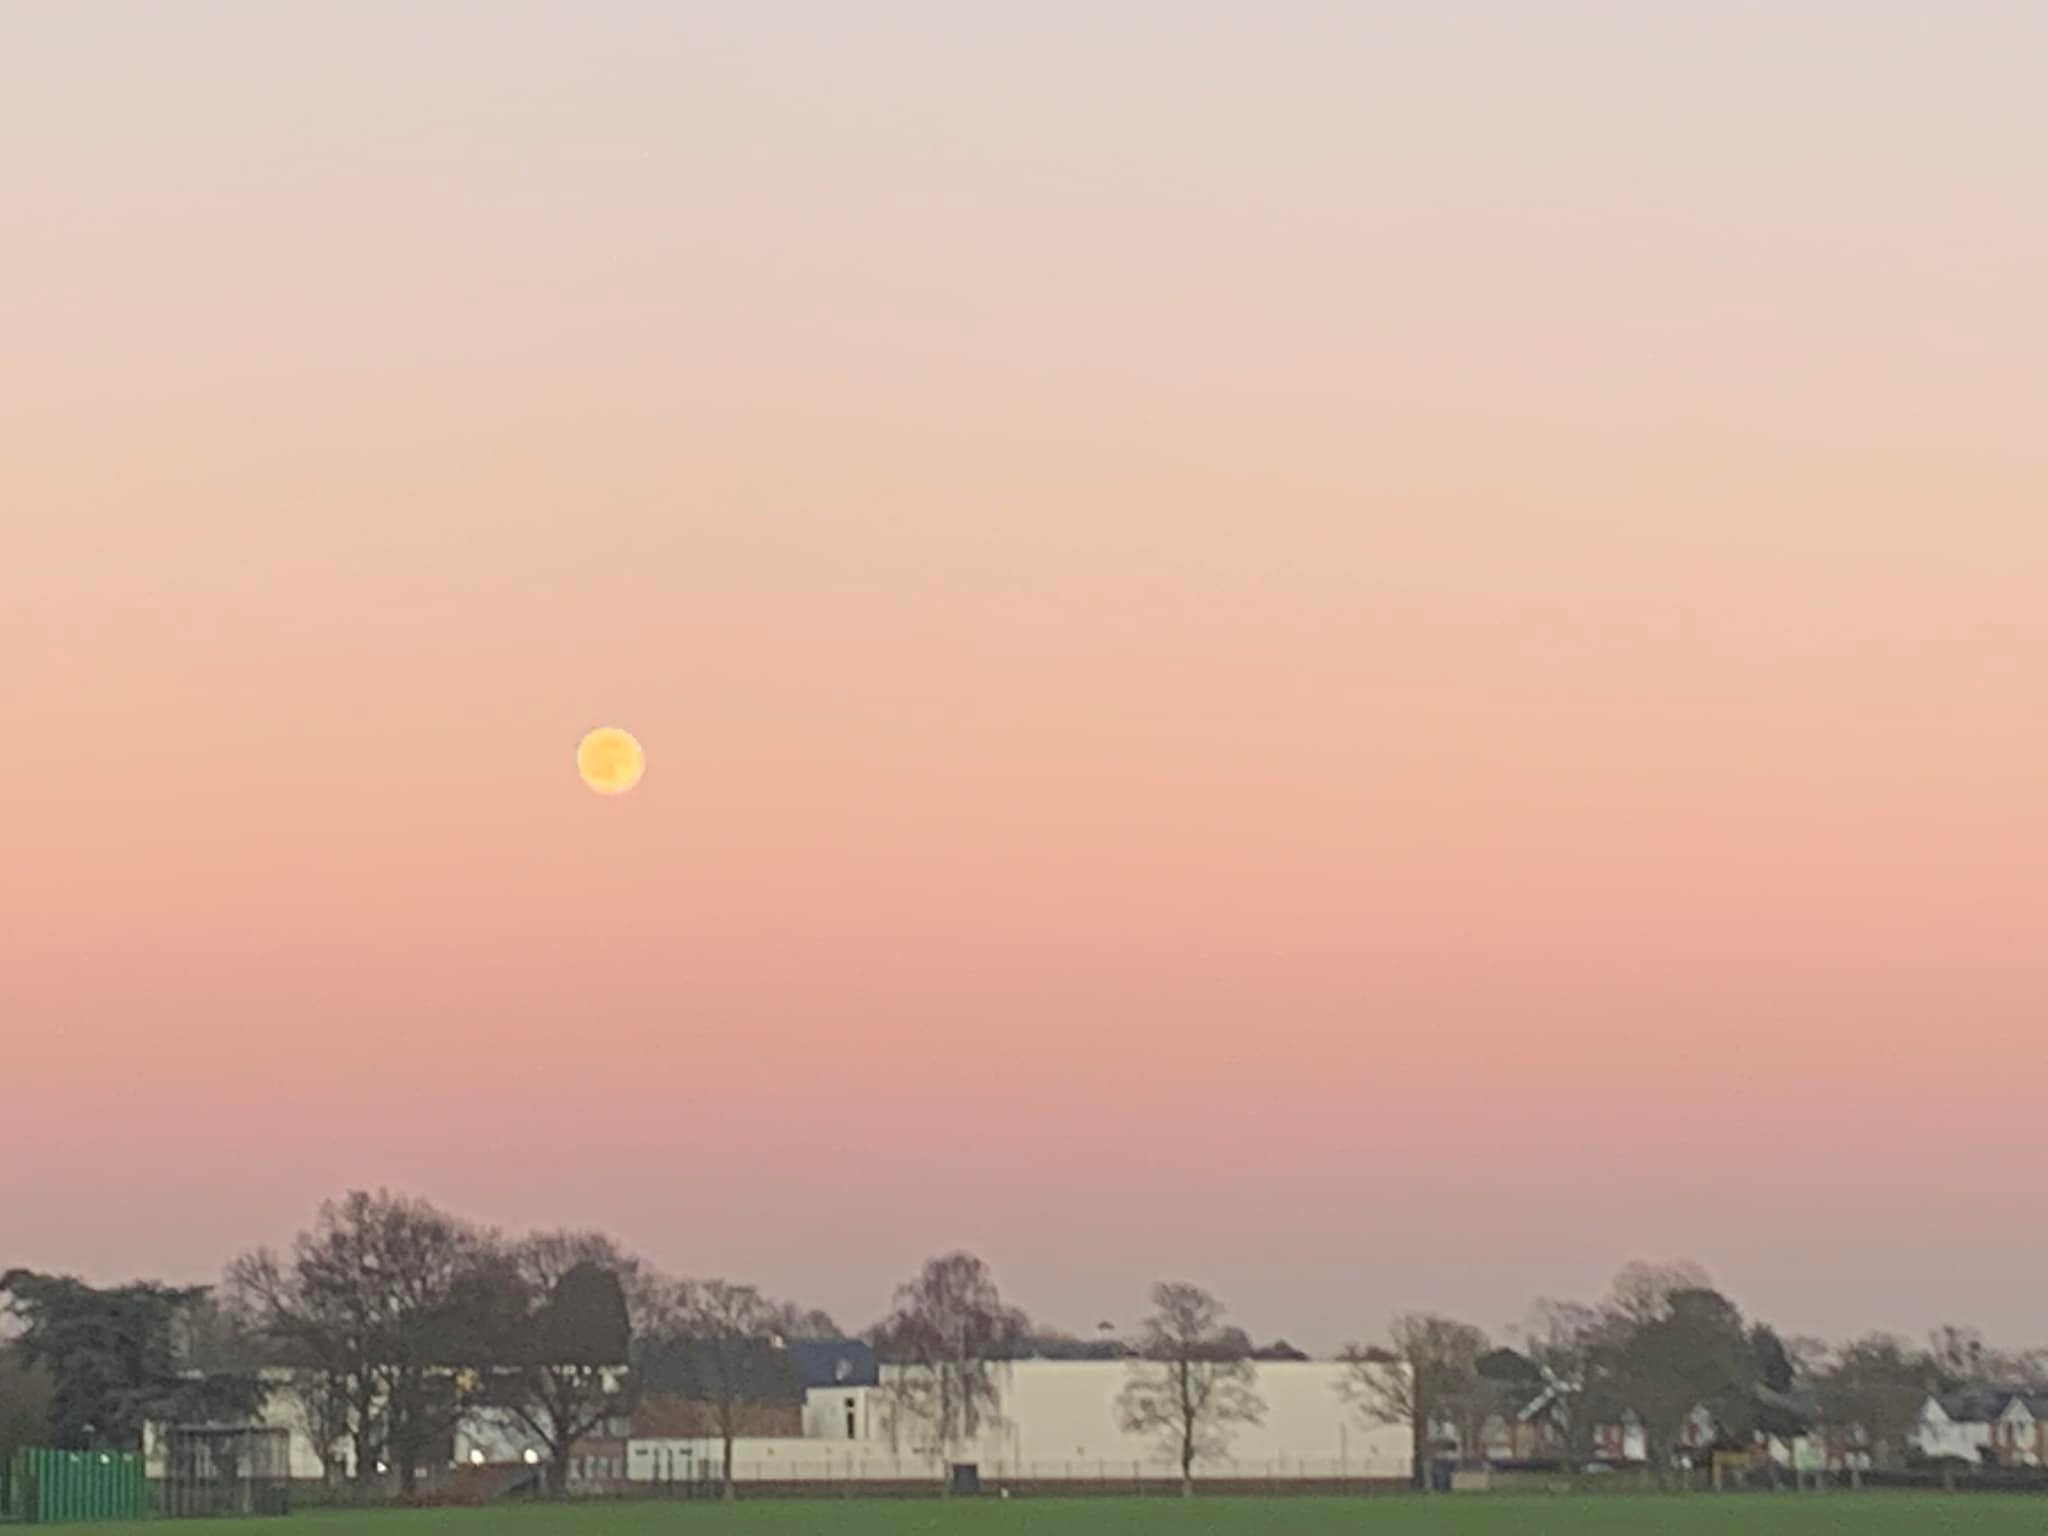 The moon appearing at dusk in Slough (Julia Hallett)